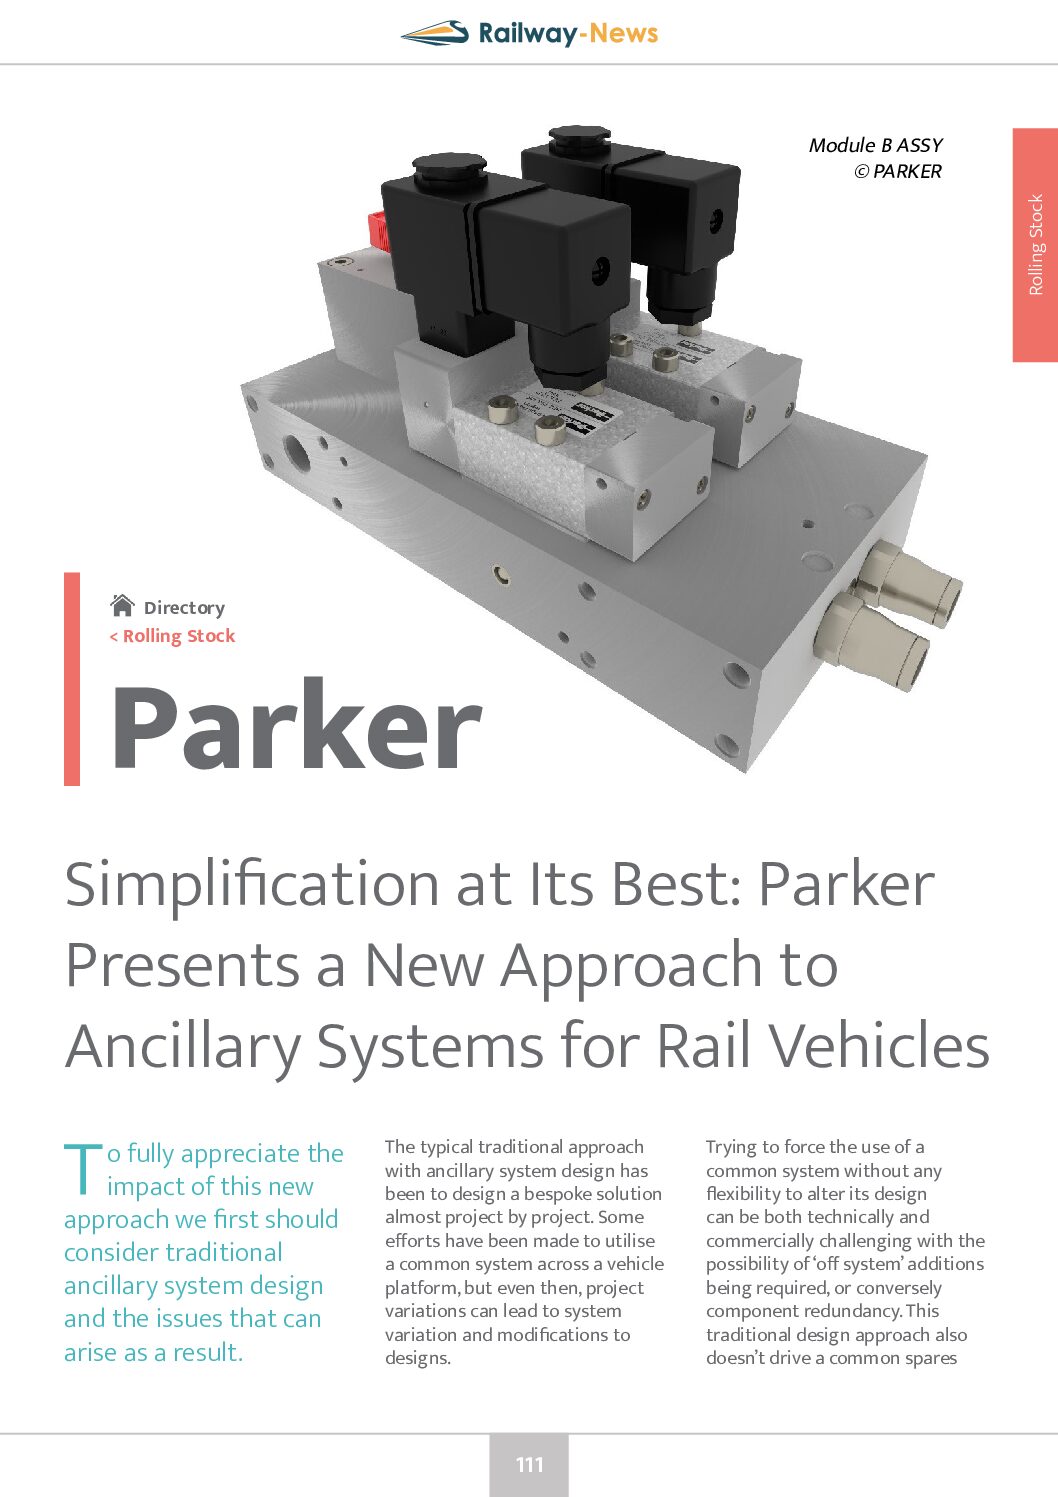 Parker – A New Approach to Ancillary Systems for Rail Vehicles